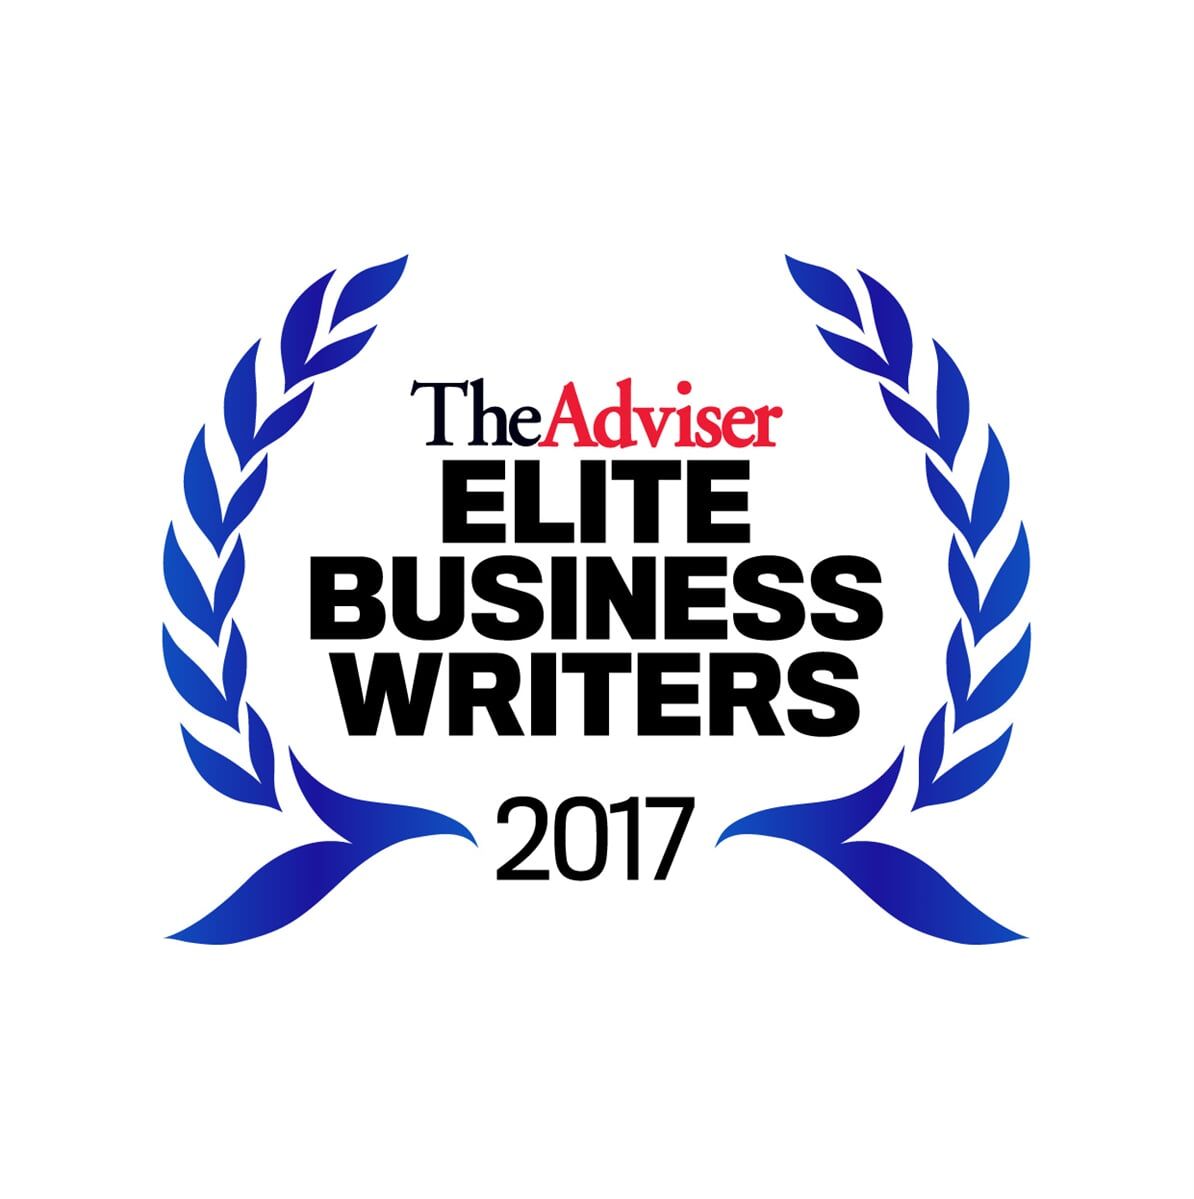 The Advisers Elite Business Writers 2017 Seal 